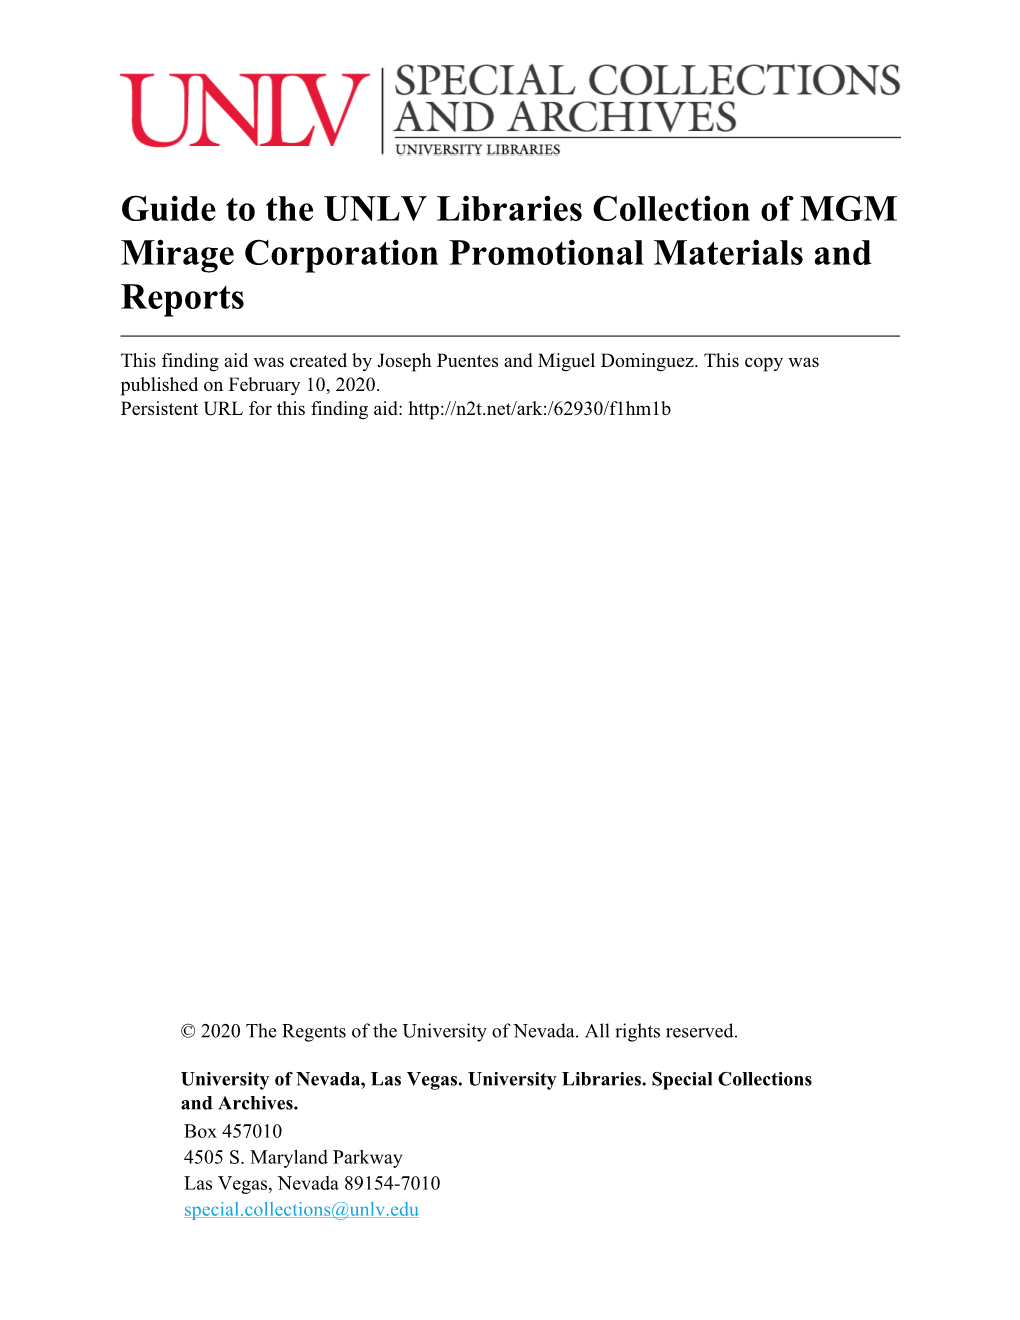 Guide to the UNLV Libraries Collection of MGM Mirage Corporation Promotional Materials and Reports